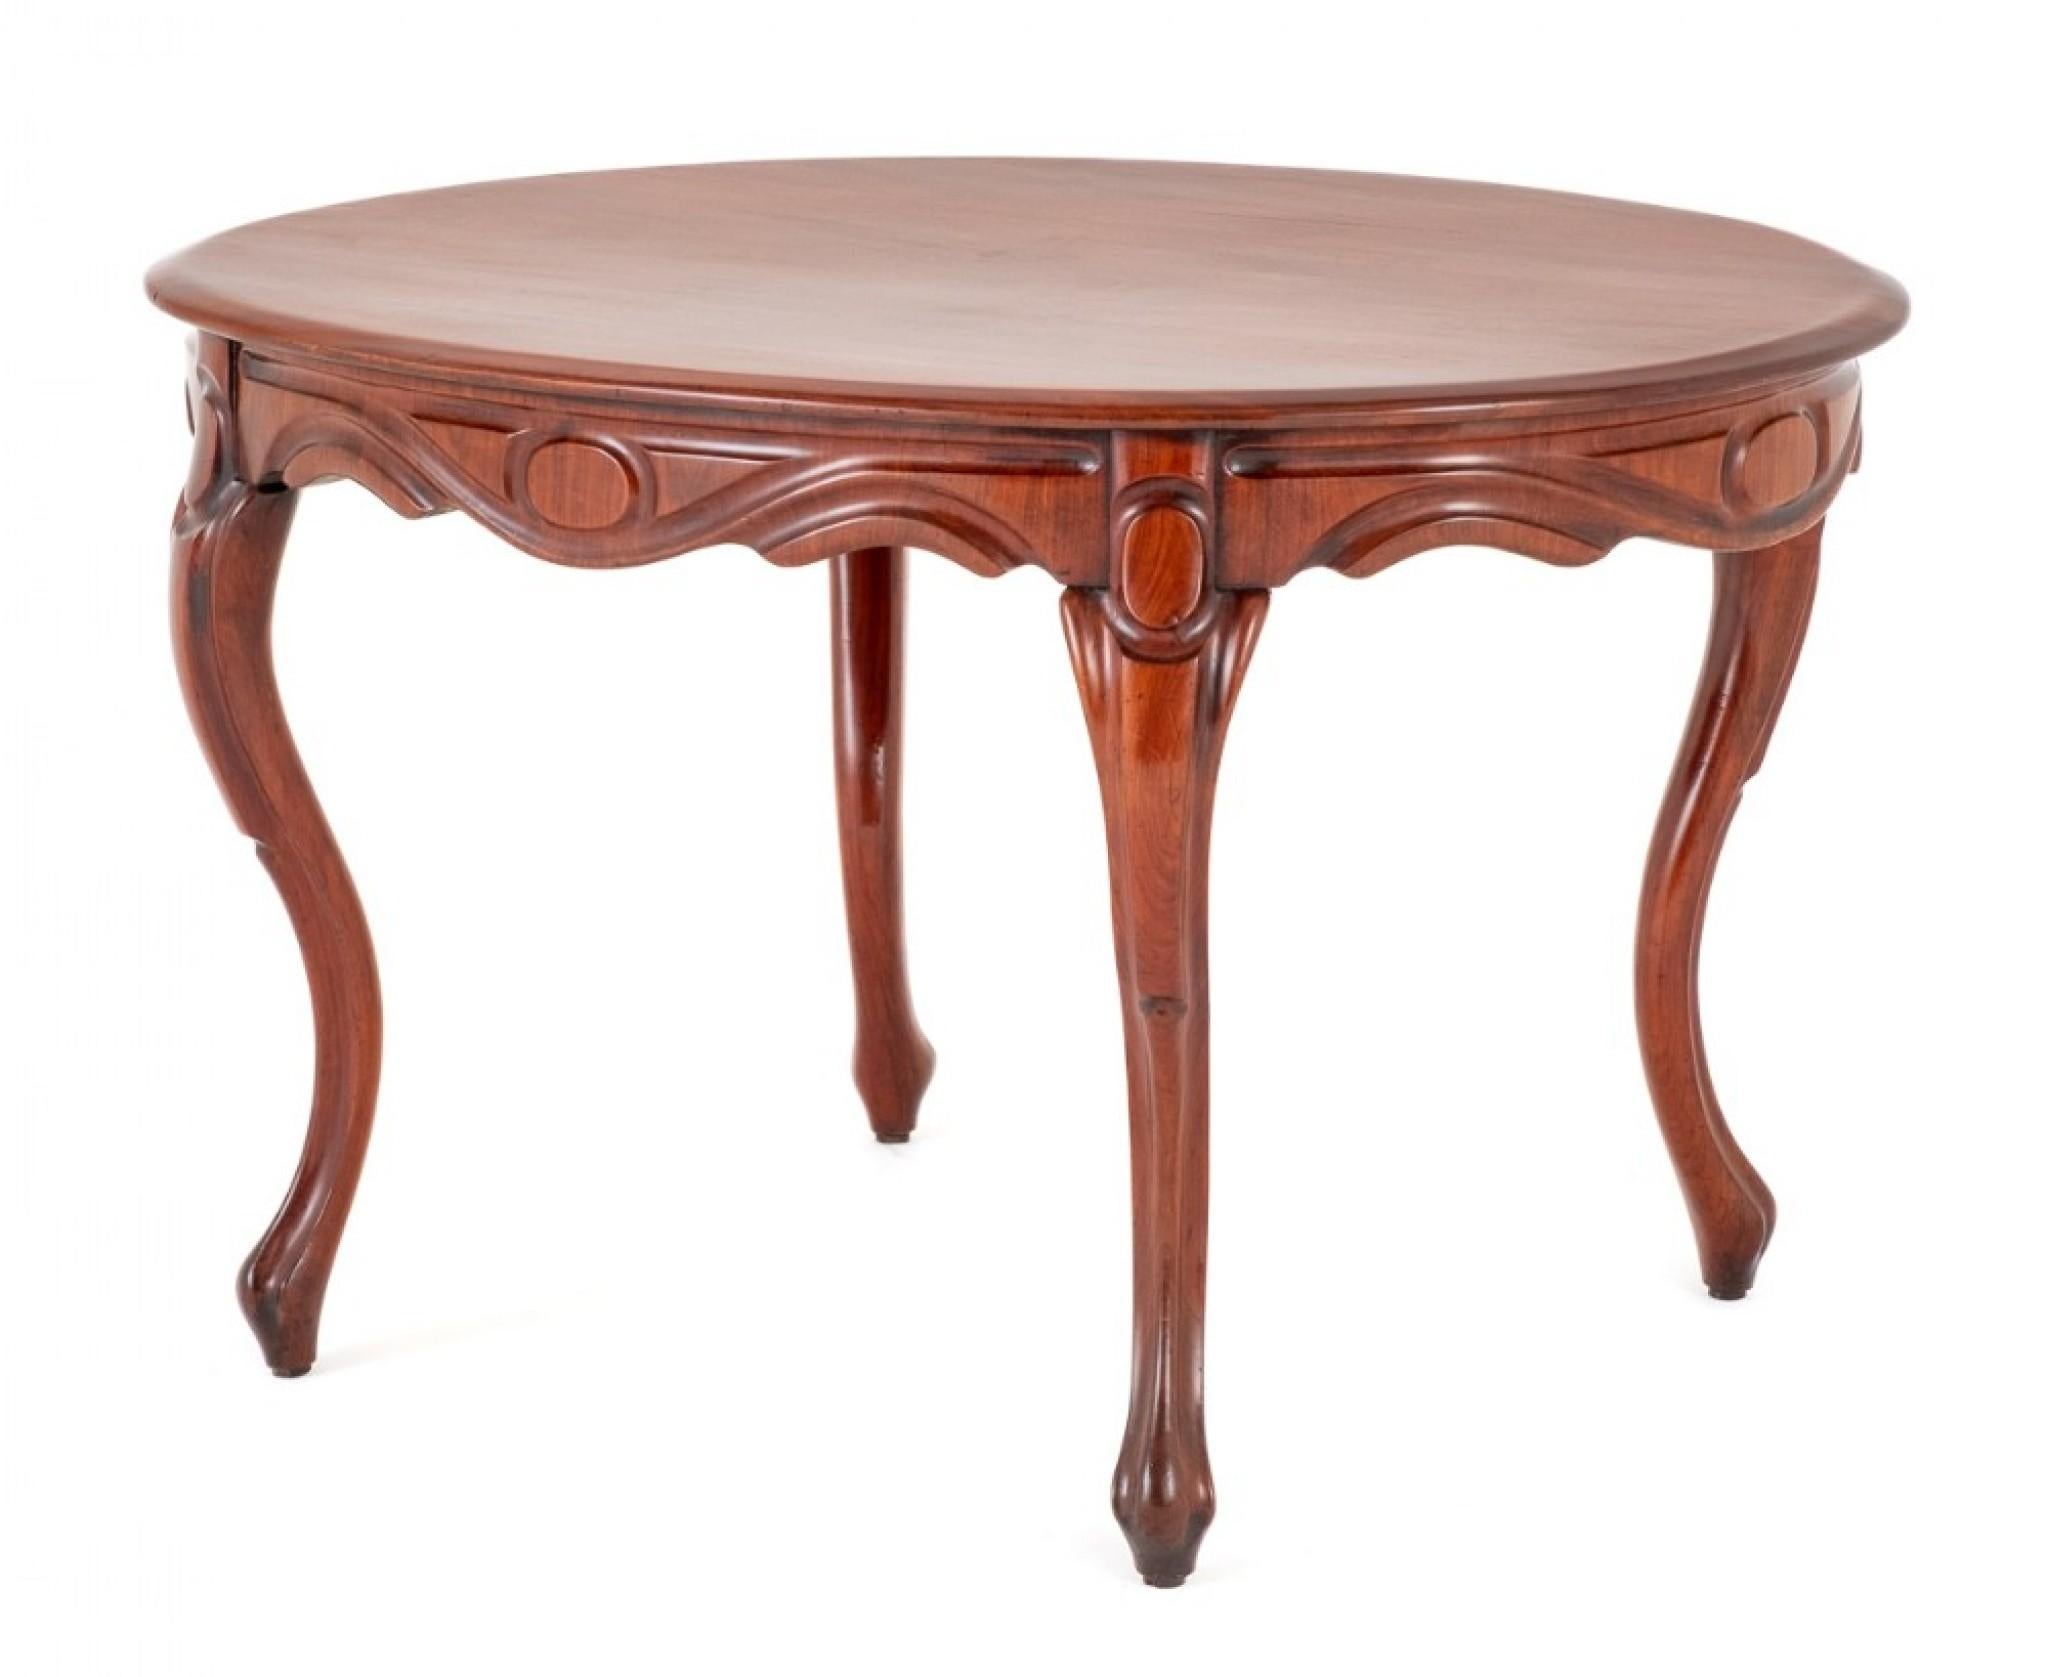 Mahogany French centre table, circa 1870. This centre table stands upon shaped legs with carved knees & feet. The frieze of the table being of a similar form. The top of the table featuring figured timbers. Presented in good condition.
Viewing by